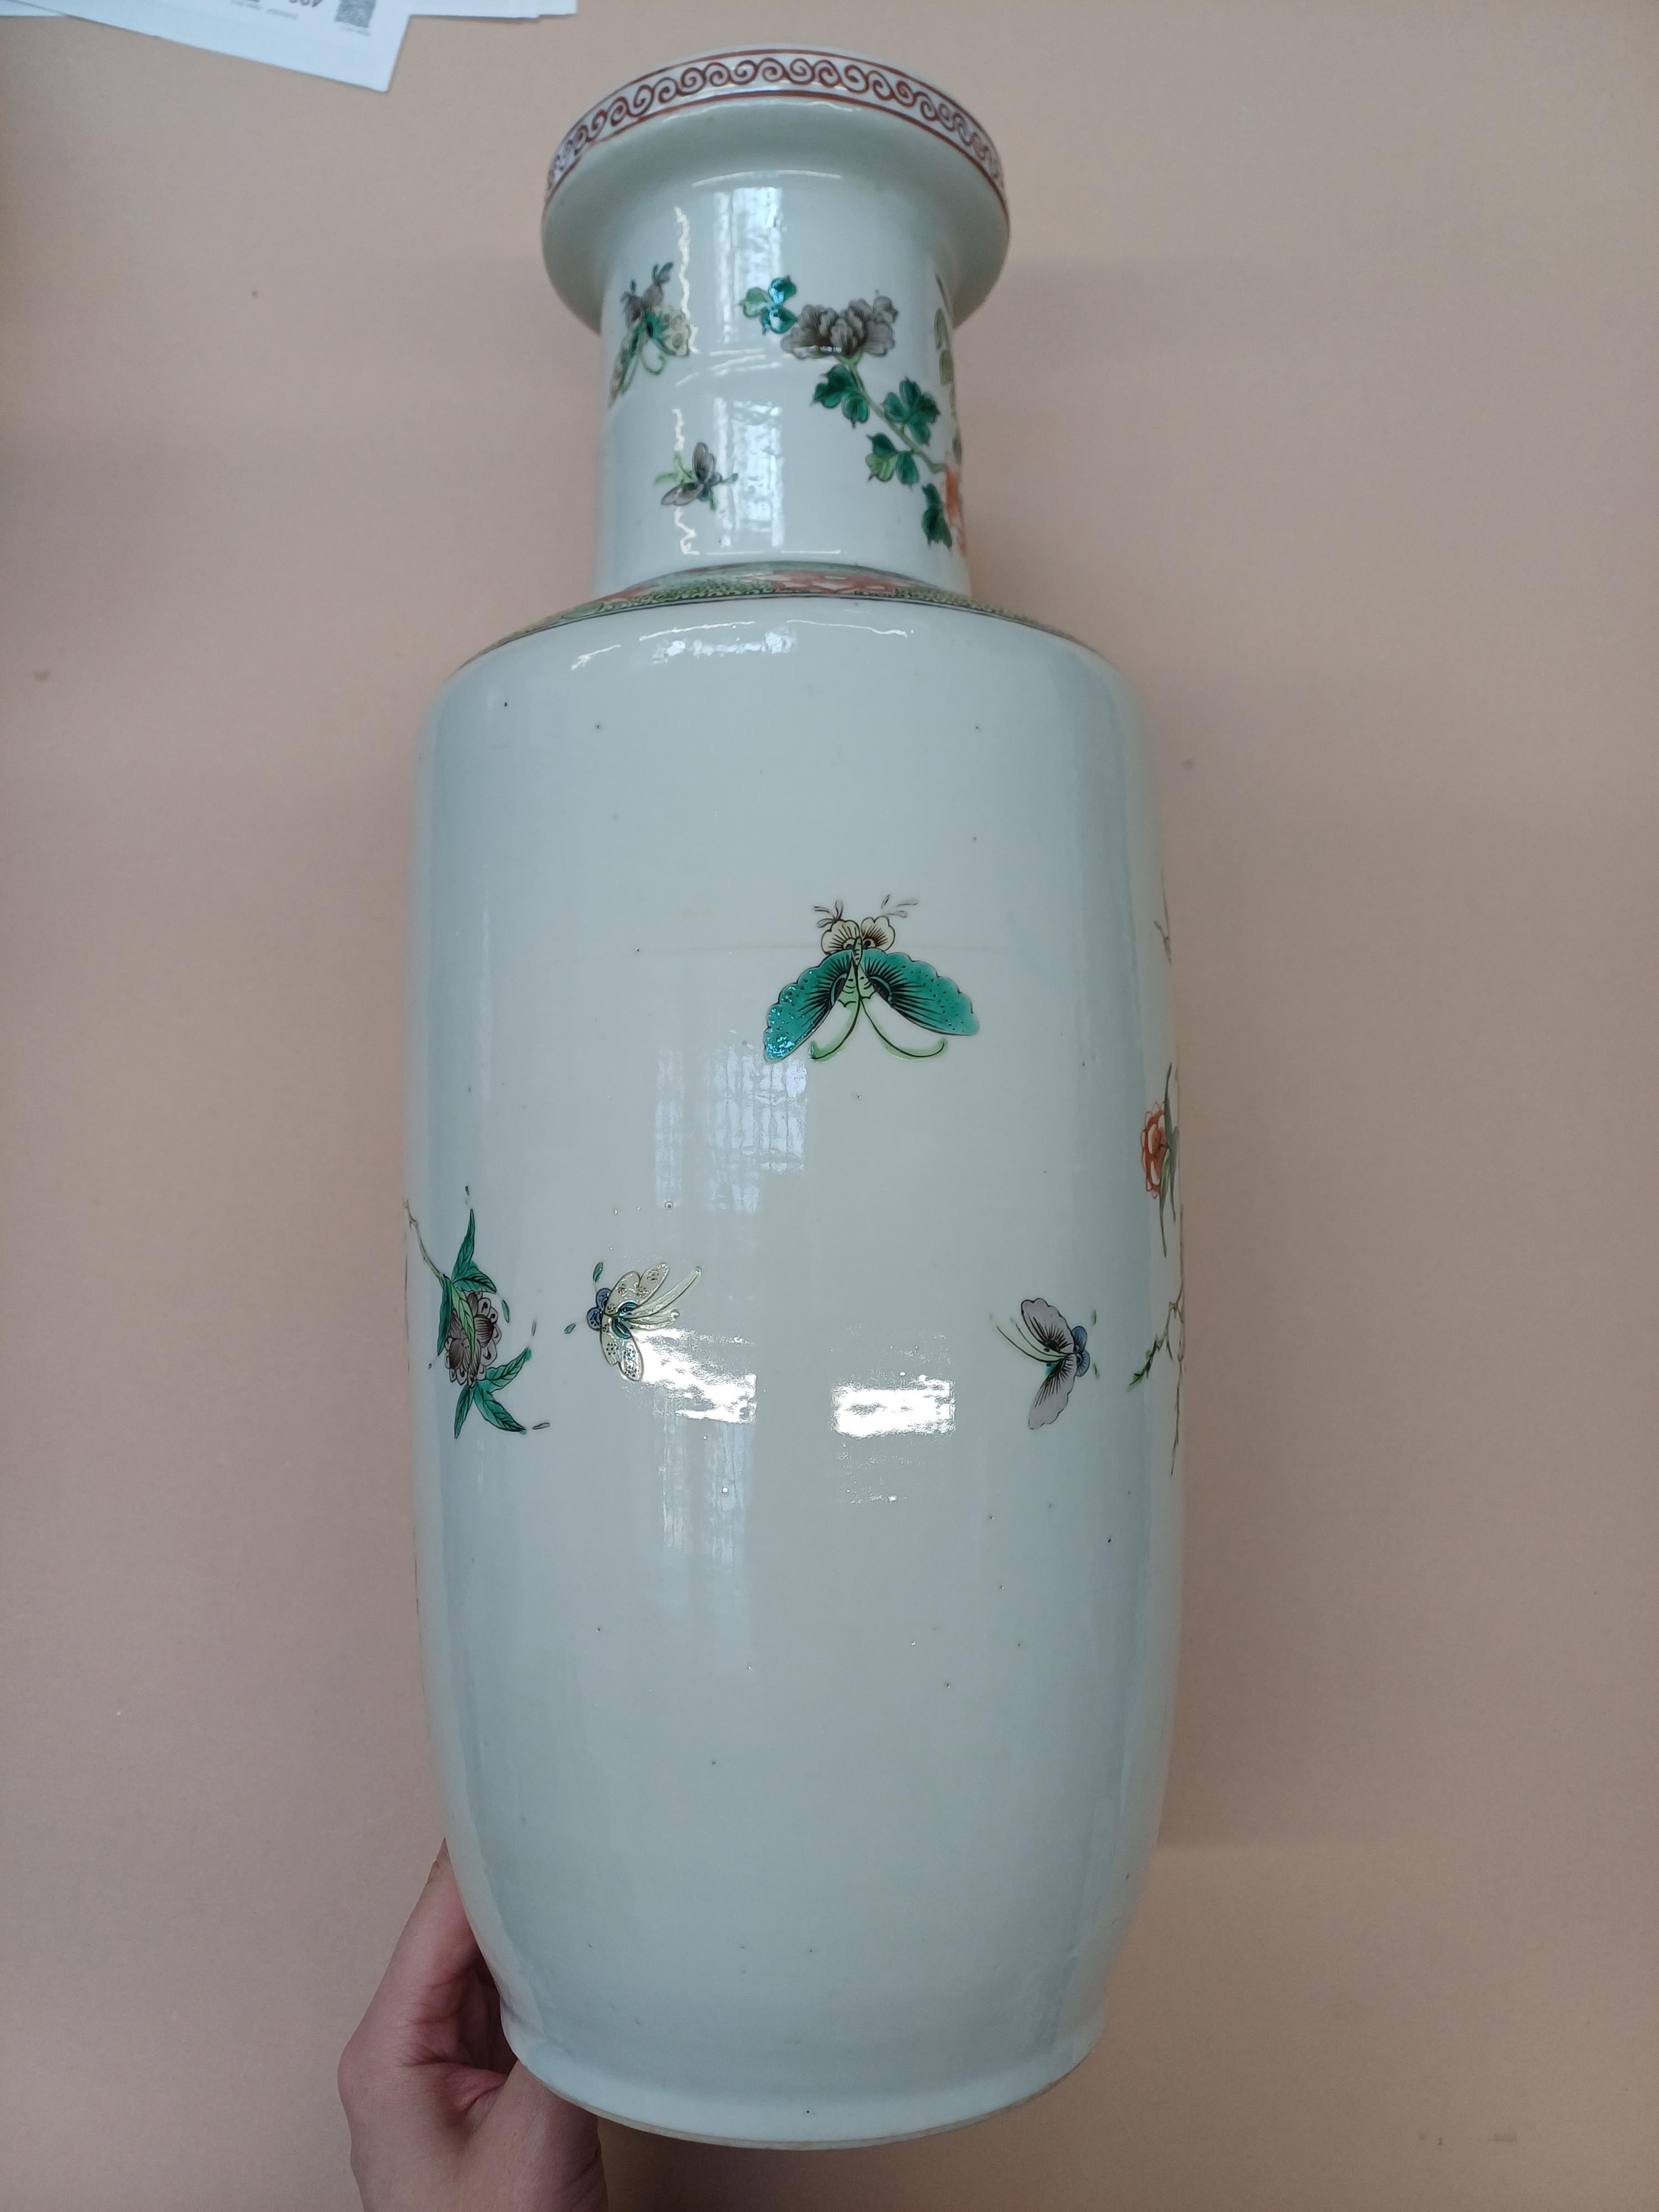 A PAIR OF FINE CHINESE FAMILLE-VERTE ‘BIRD AND BLOSSOM’ VASES 清康熙 五彩花鳥圖紋瓶一對 - Image 16 of 16